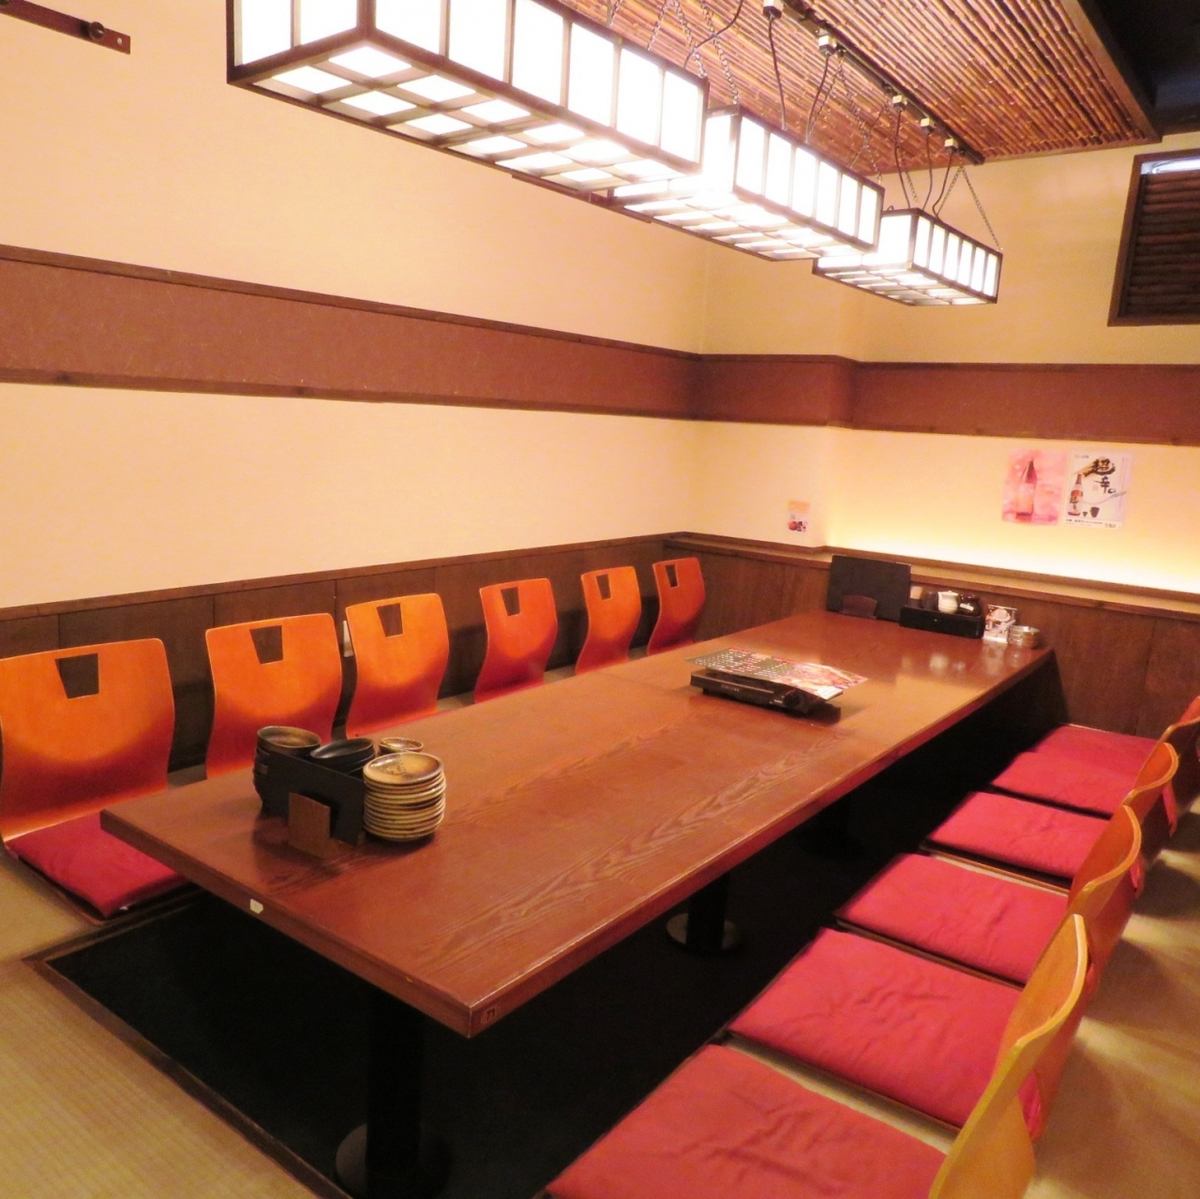 The private room with a sunken kotatsu seat can accommodate small groups up to 40 people! Great for welcome/farewell parties and various banquets.